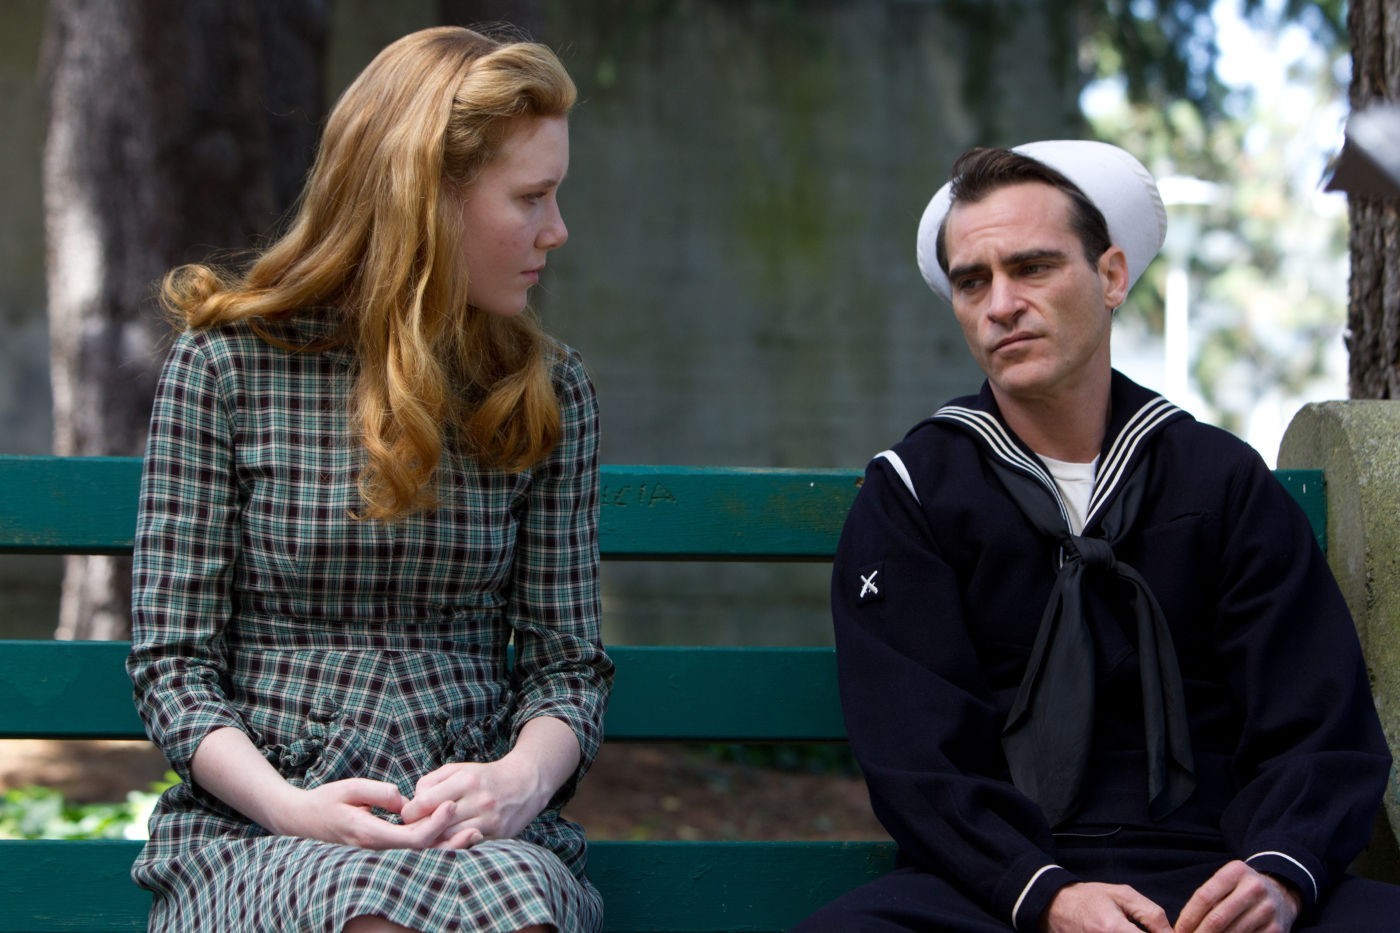 Amy Adams stars as Mary Sue Dodd and Joaquin Phoenix stars as Freddie Sutton in The Weinstein Company's The Master (2012)